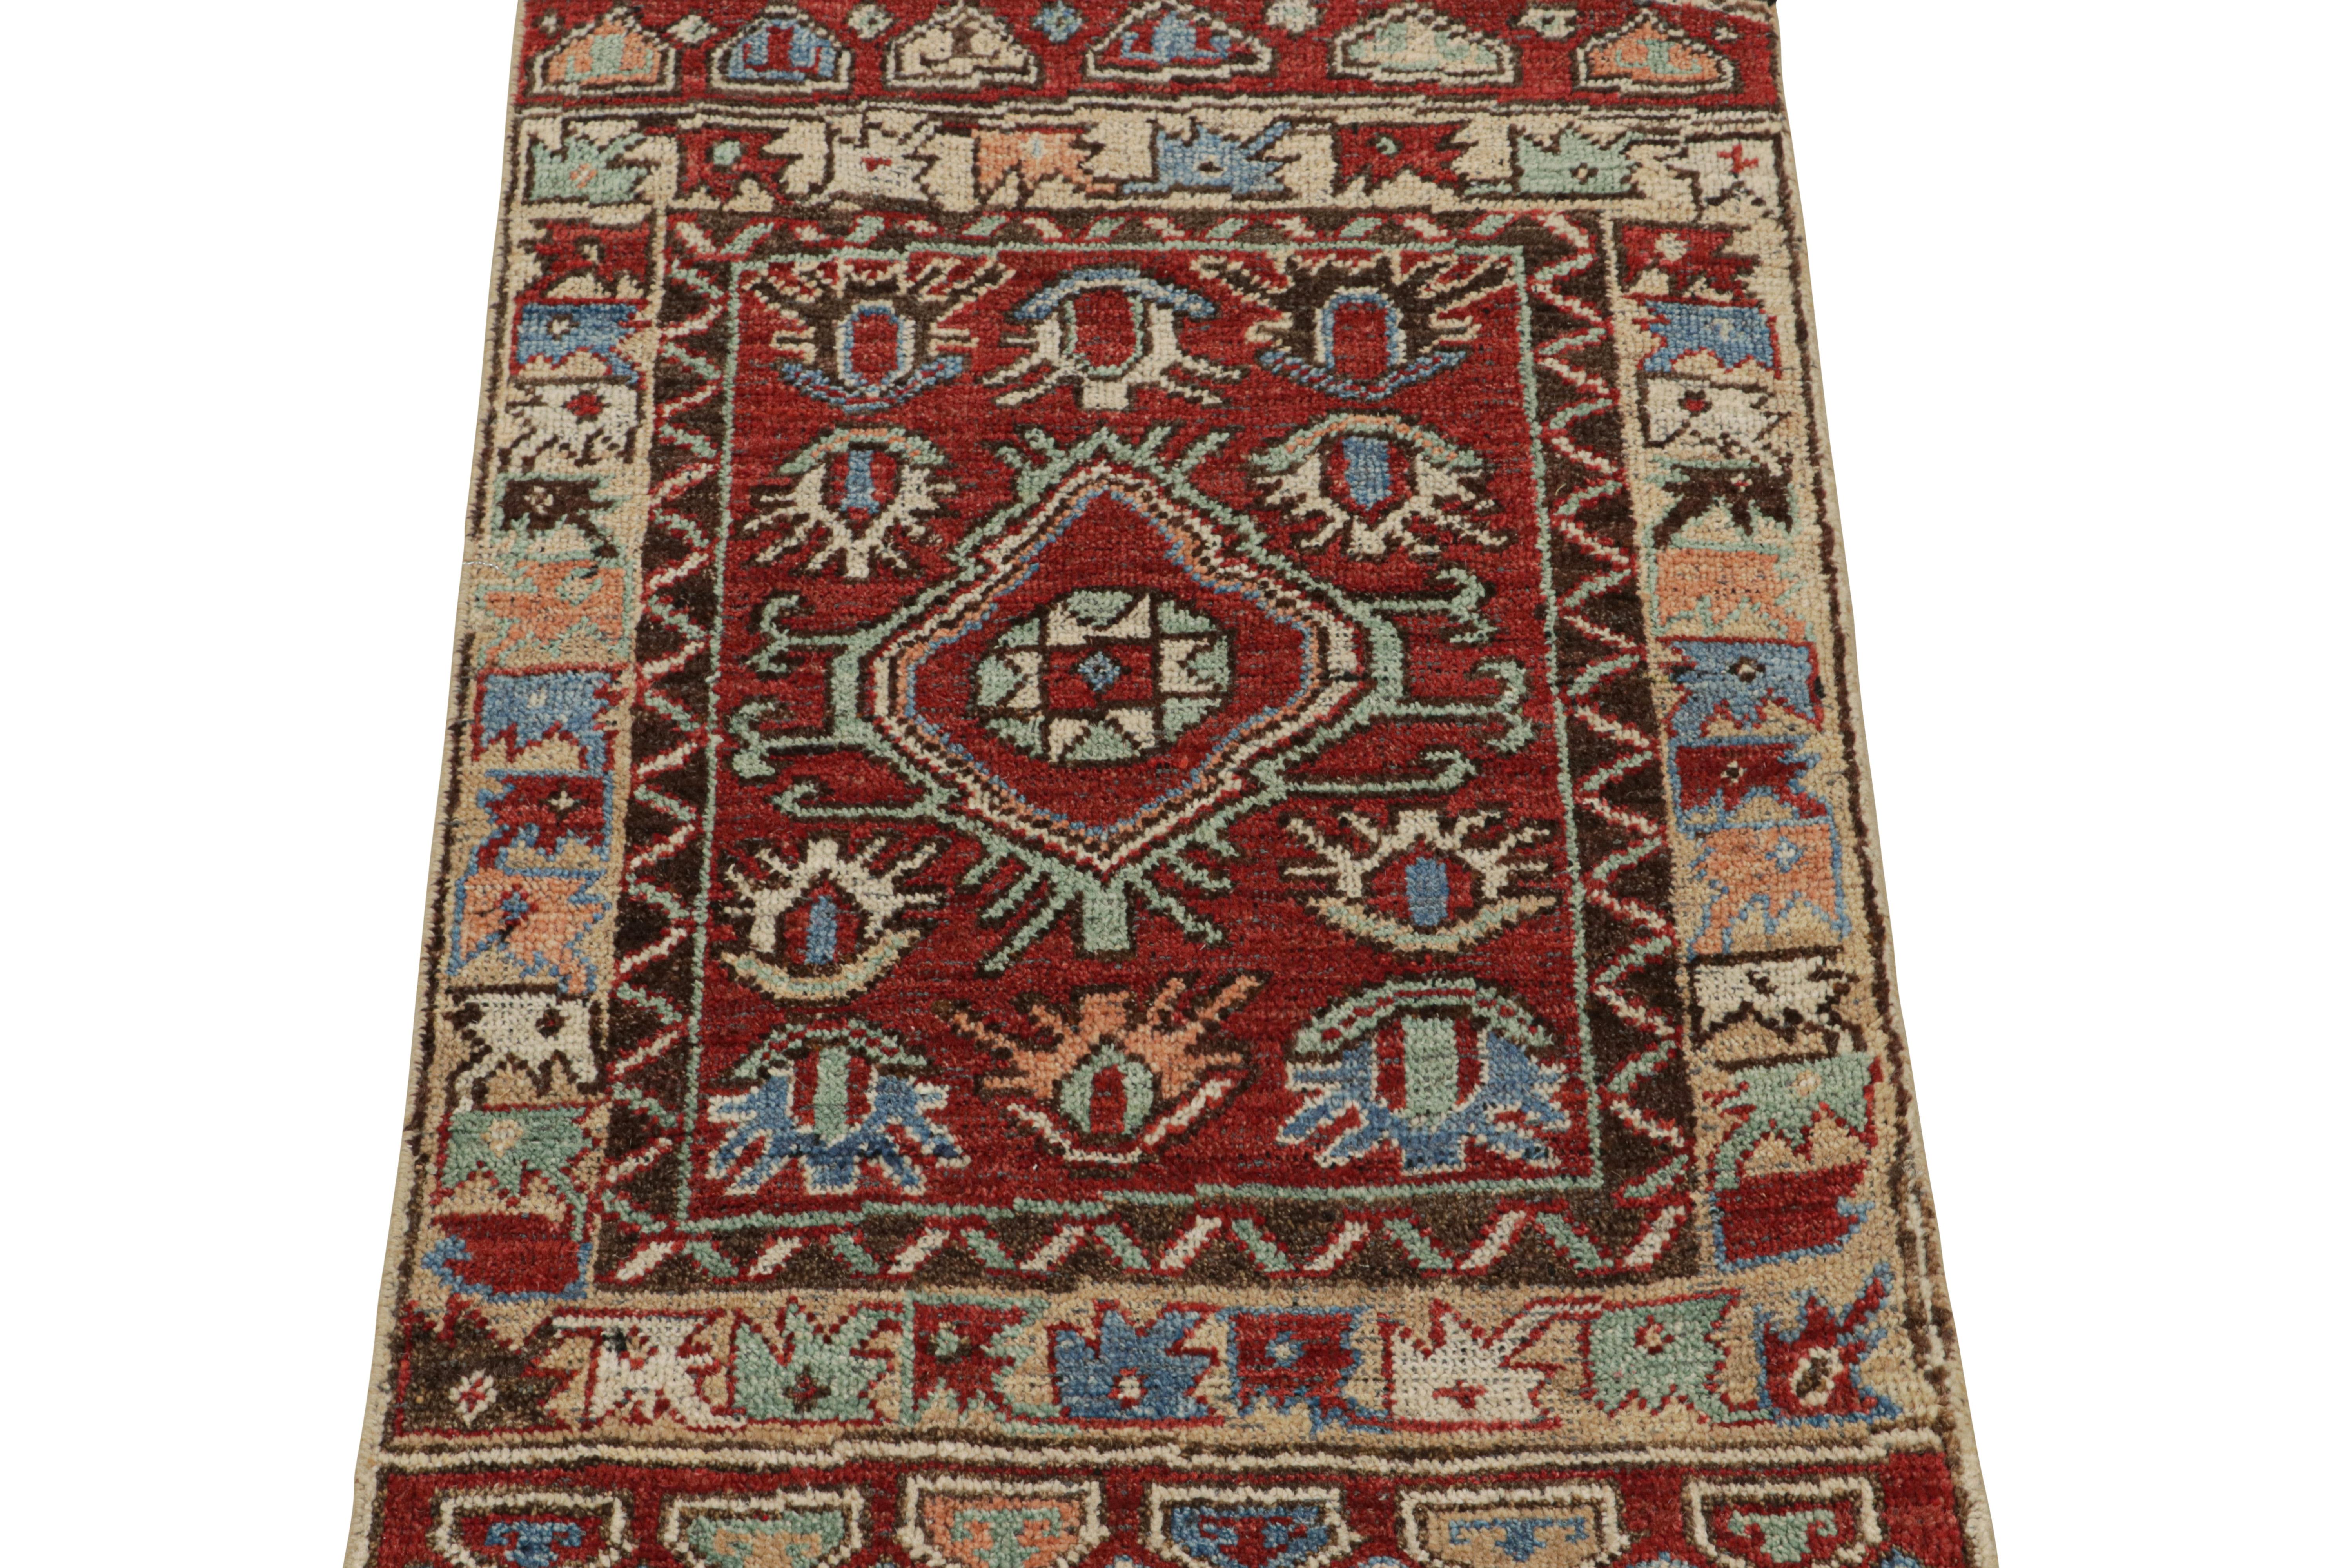 Indian Rug & Kilim’s Antique Tribal Style Rug in Red, Blue, Green & Black Patterns For Sale